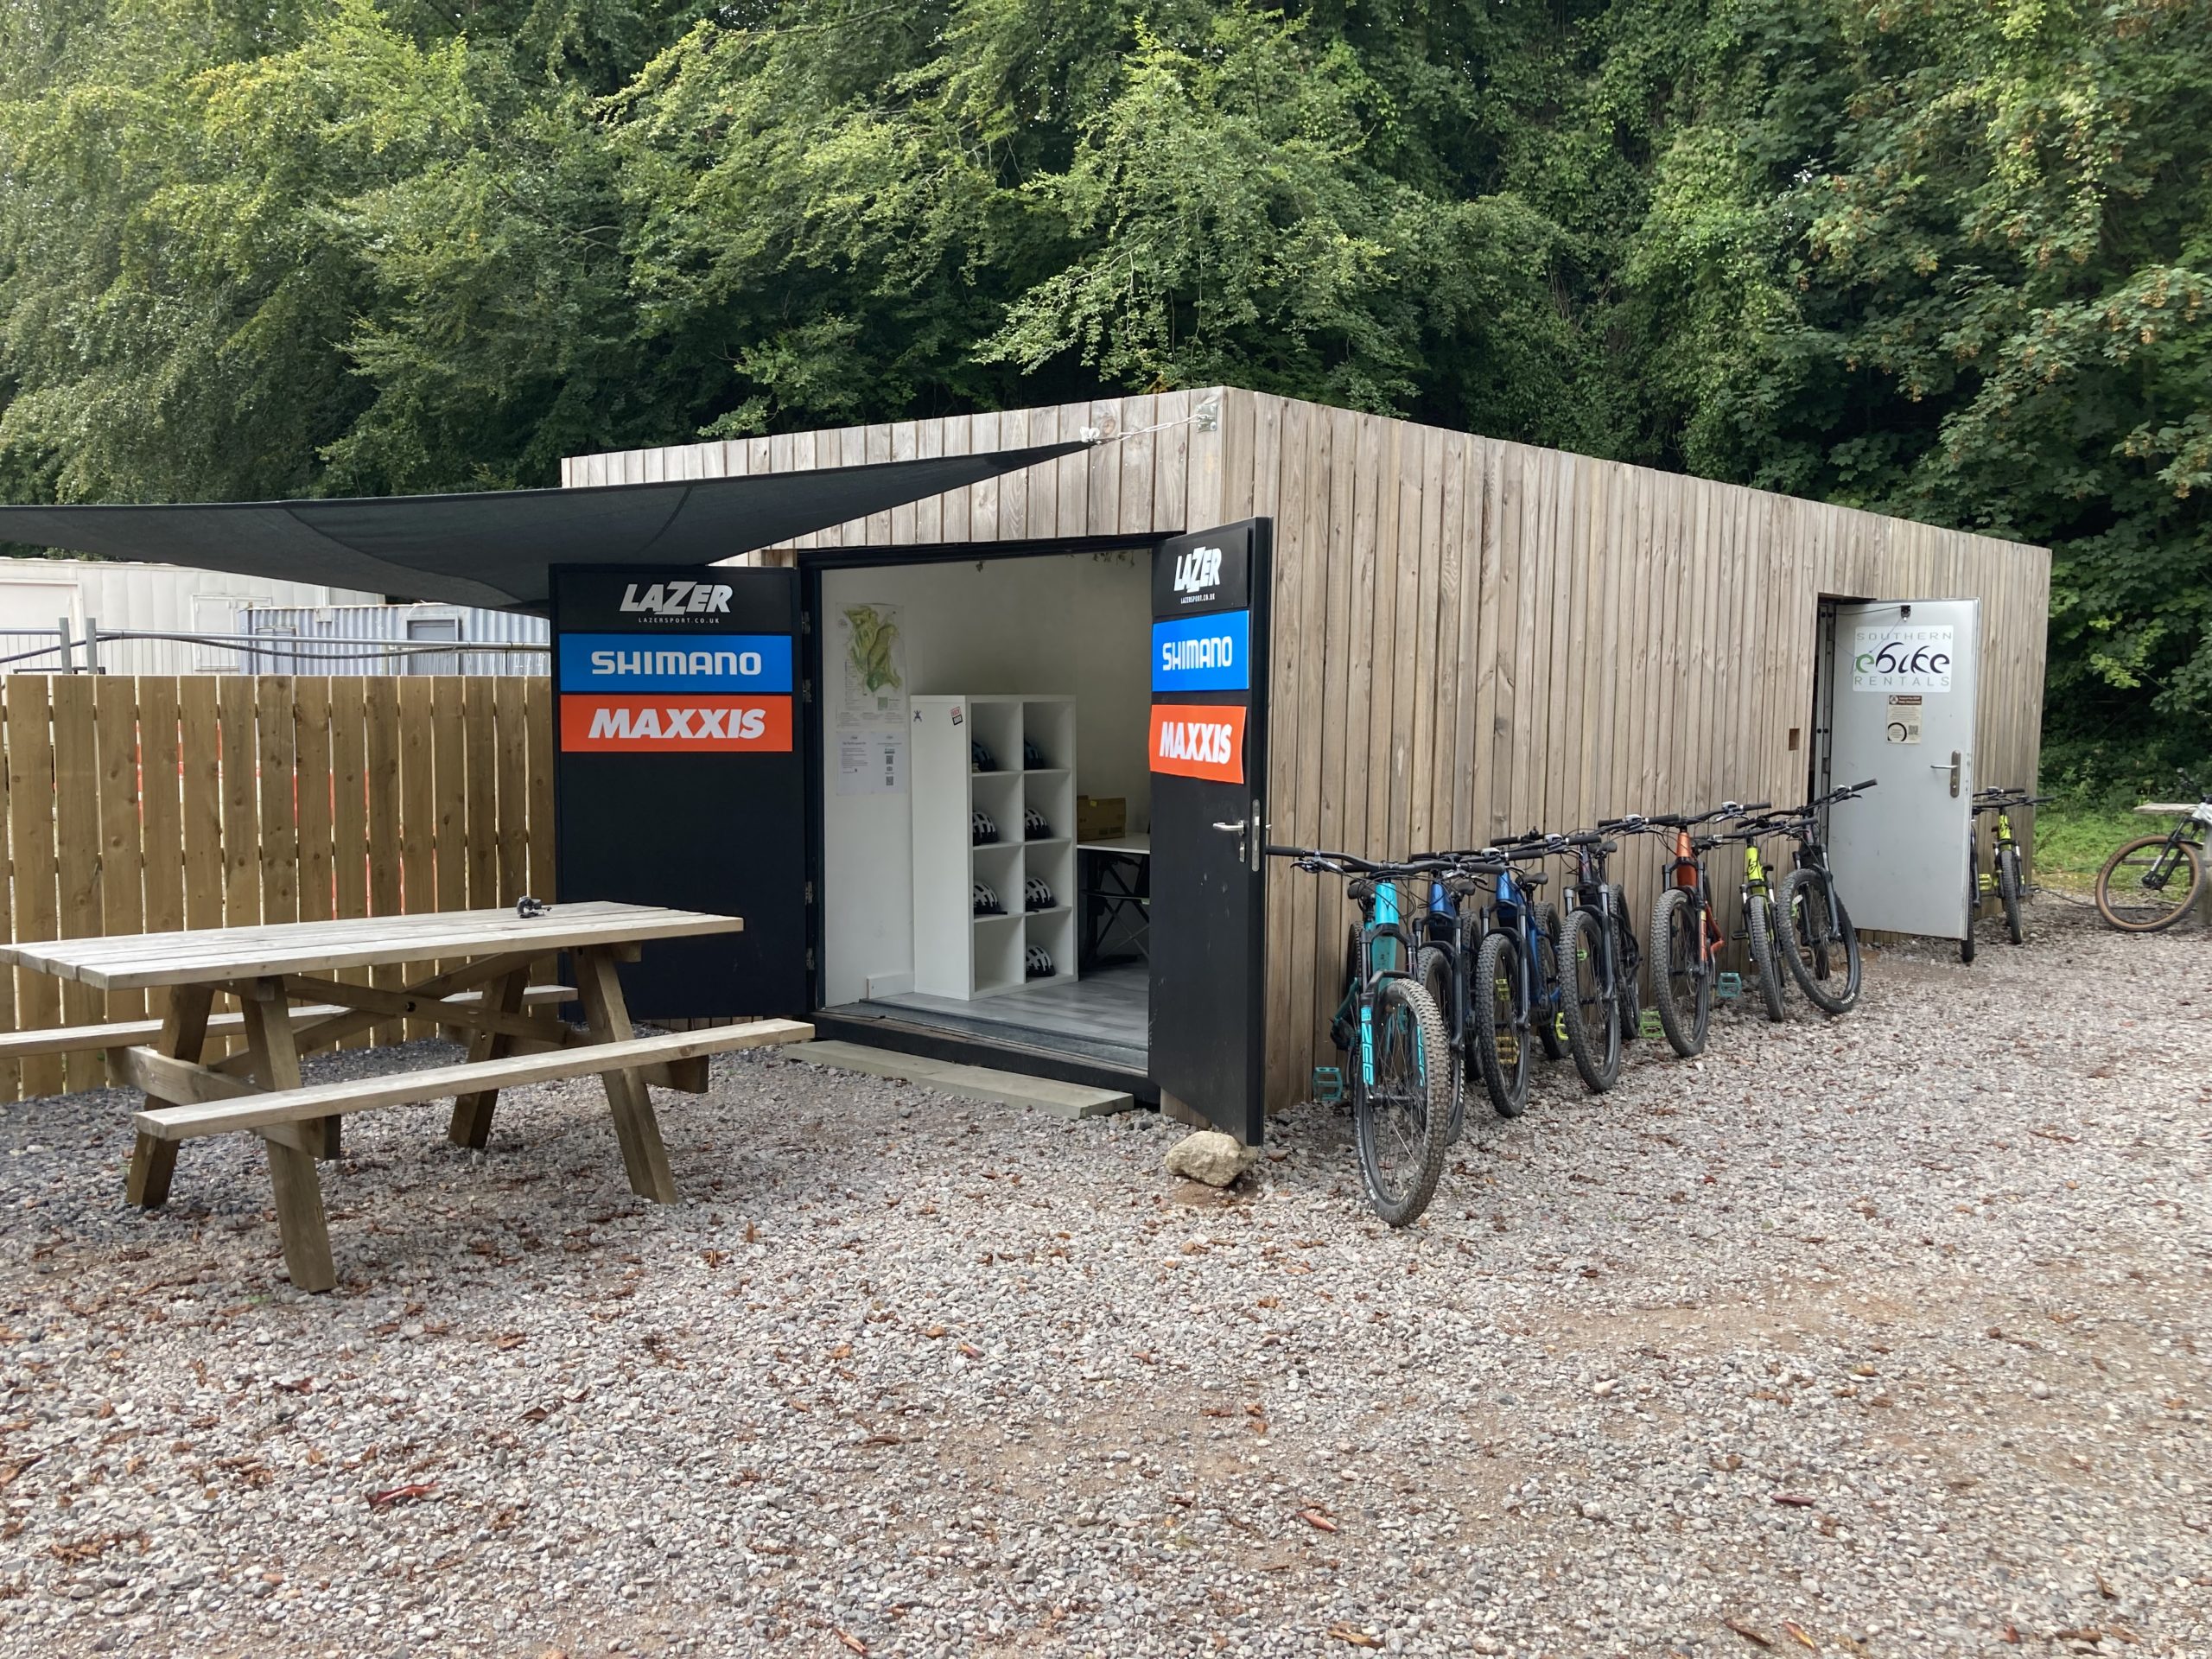 Southern E Bike Rentals base in Queen Elizabeth Country Park, Hampshire